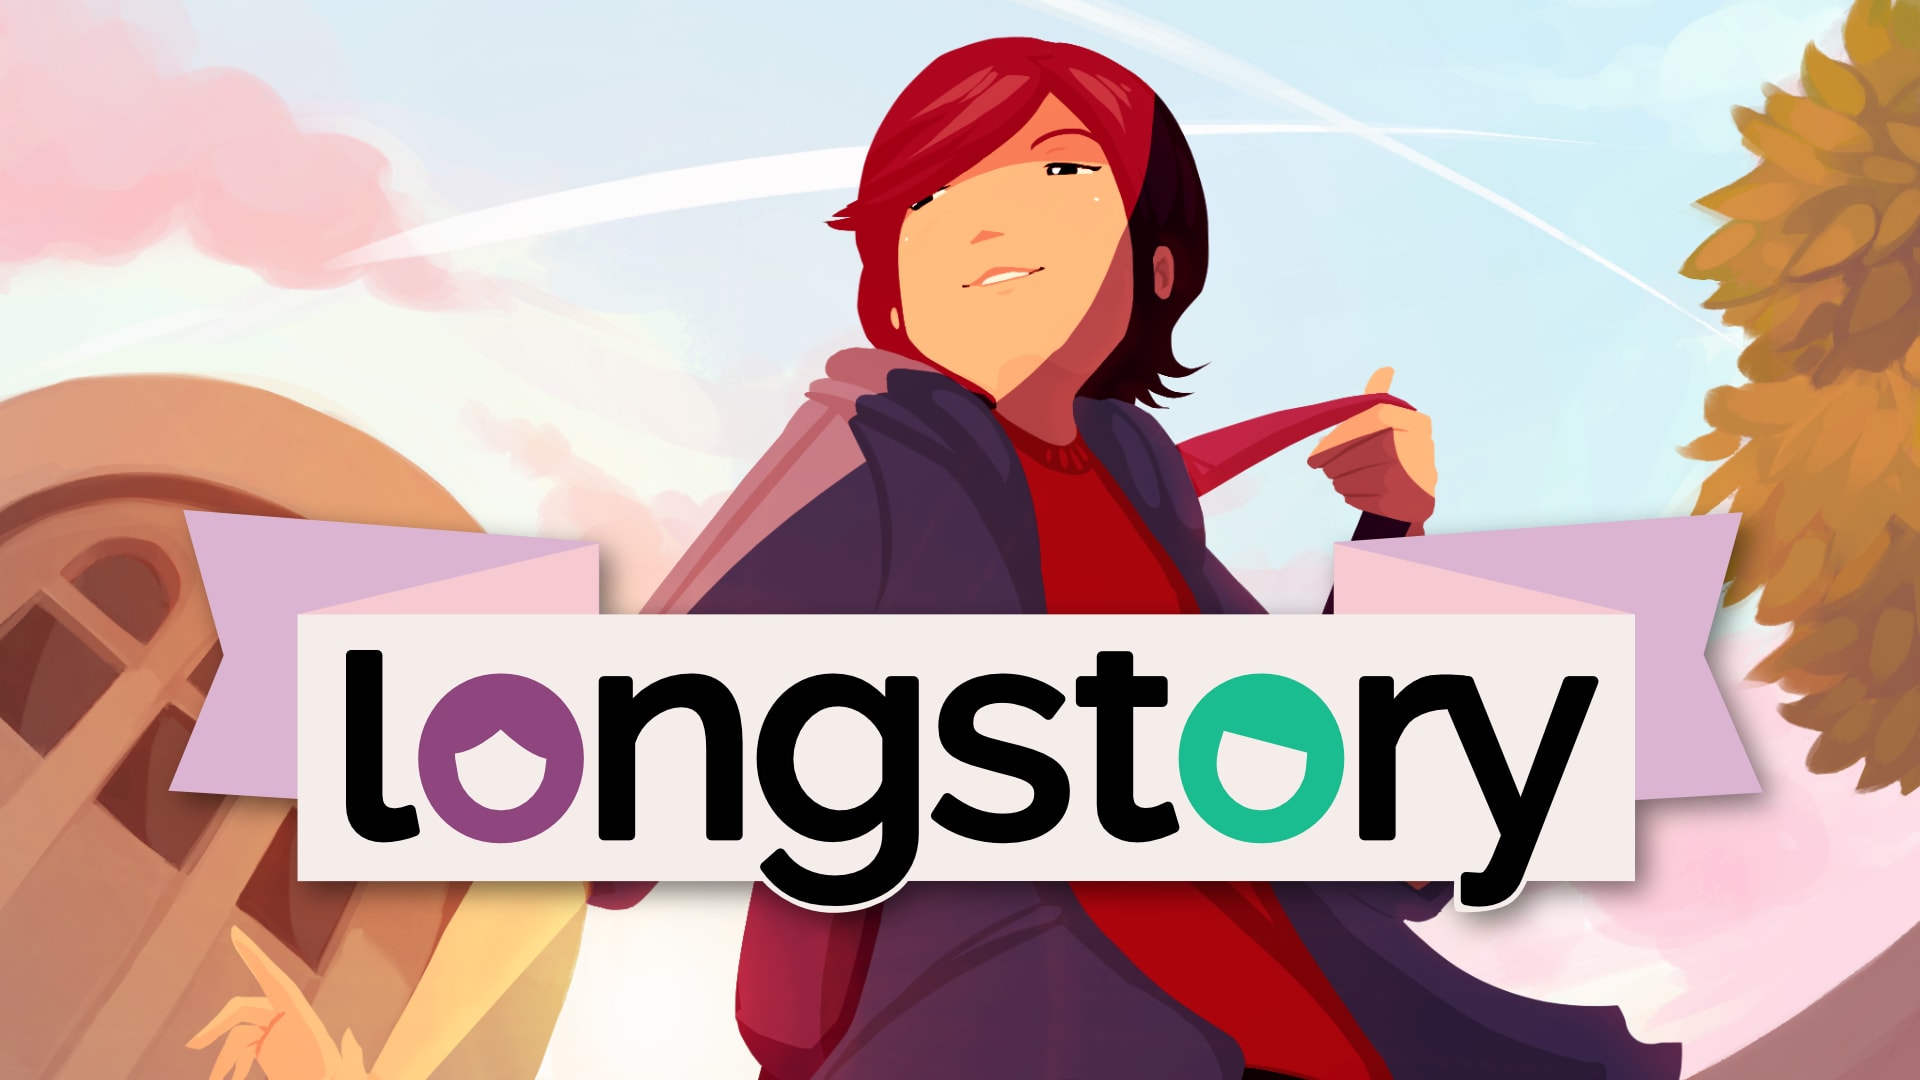 LongStory: A dating game for the real world